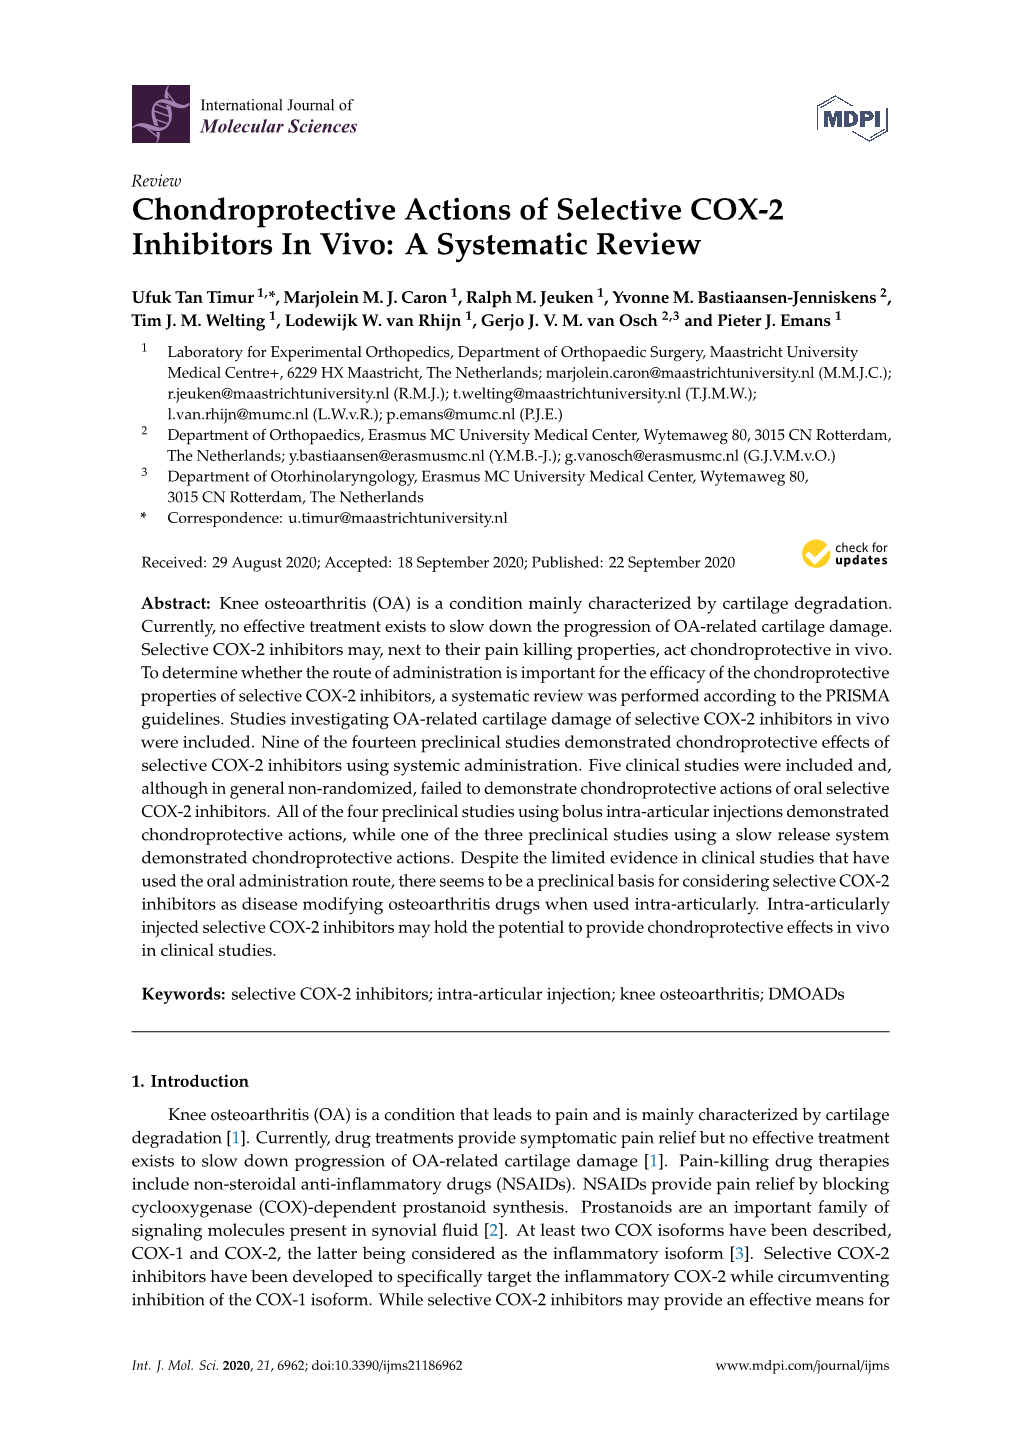 Chondroprotective Actions of Selective COX-2 Inhibitors in Vivo: a Systematic Review